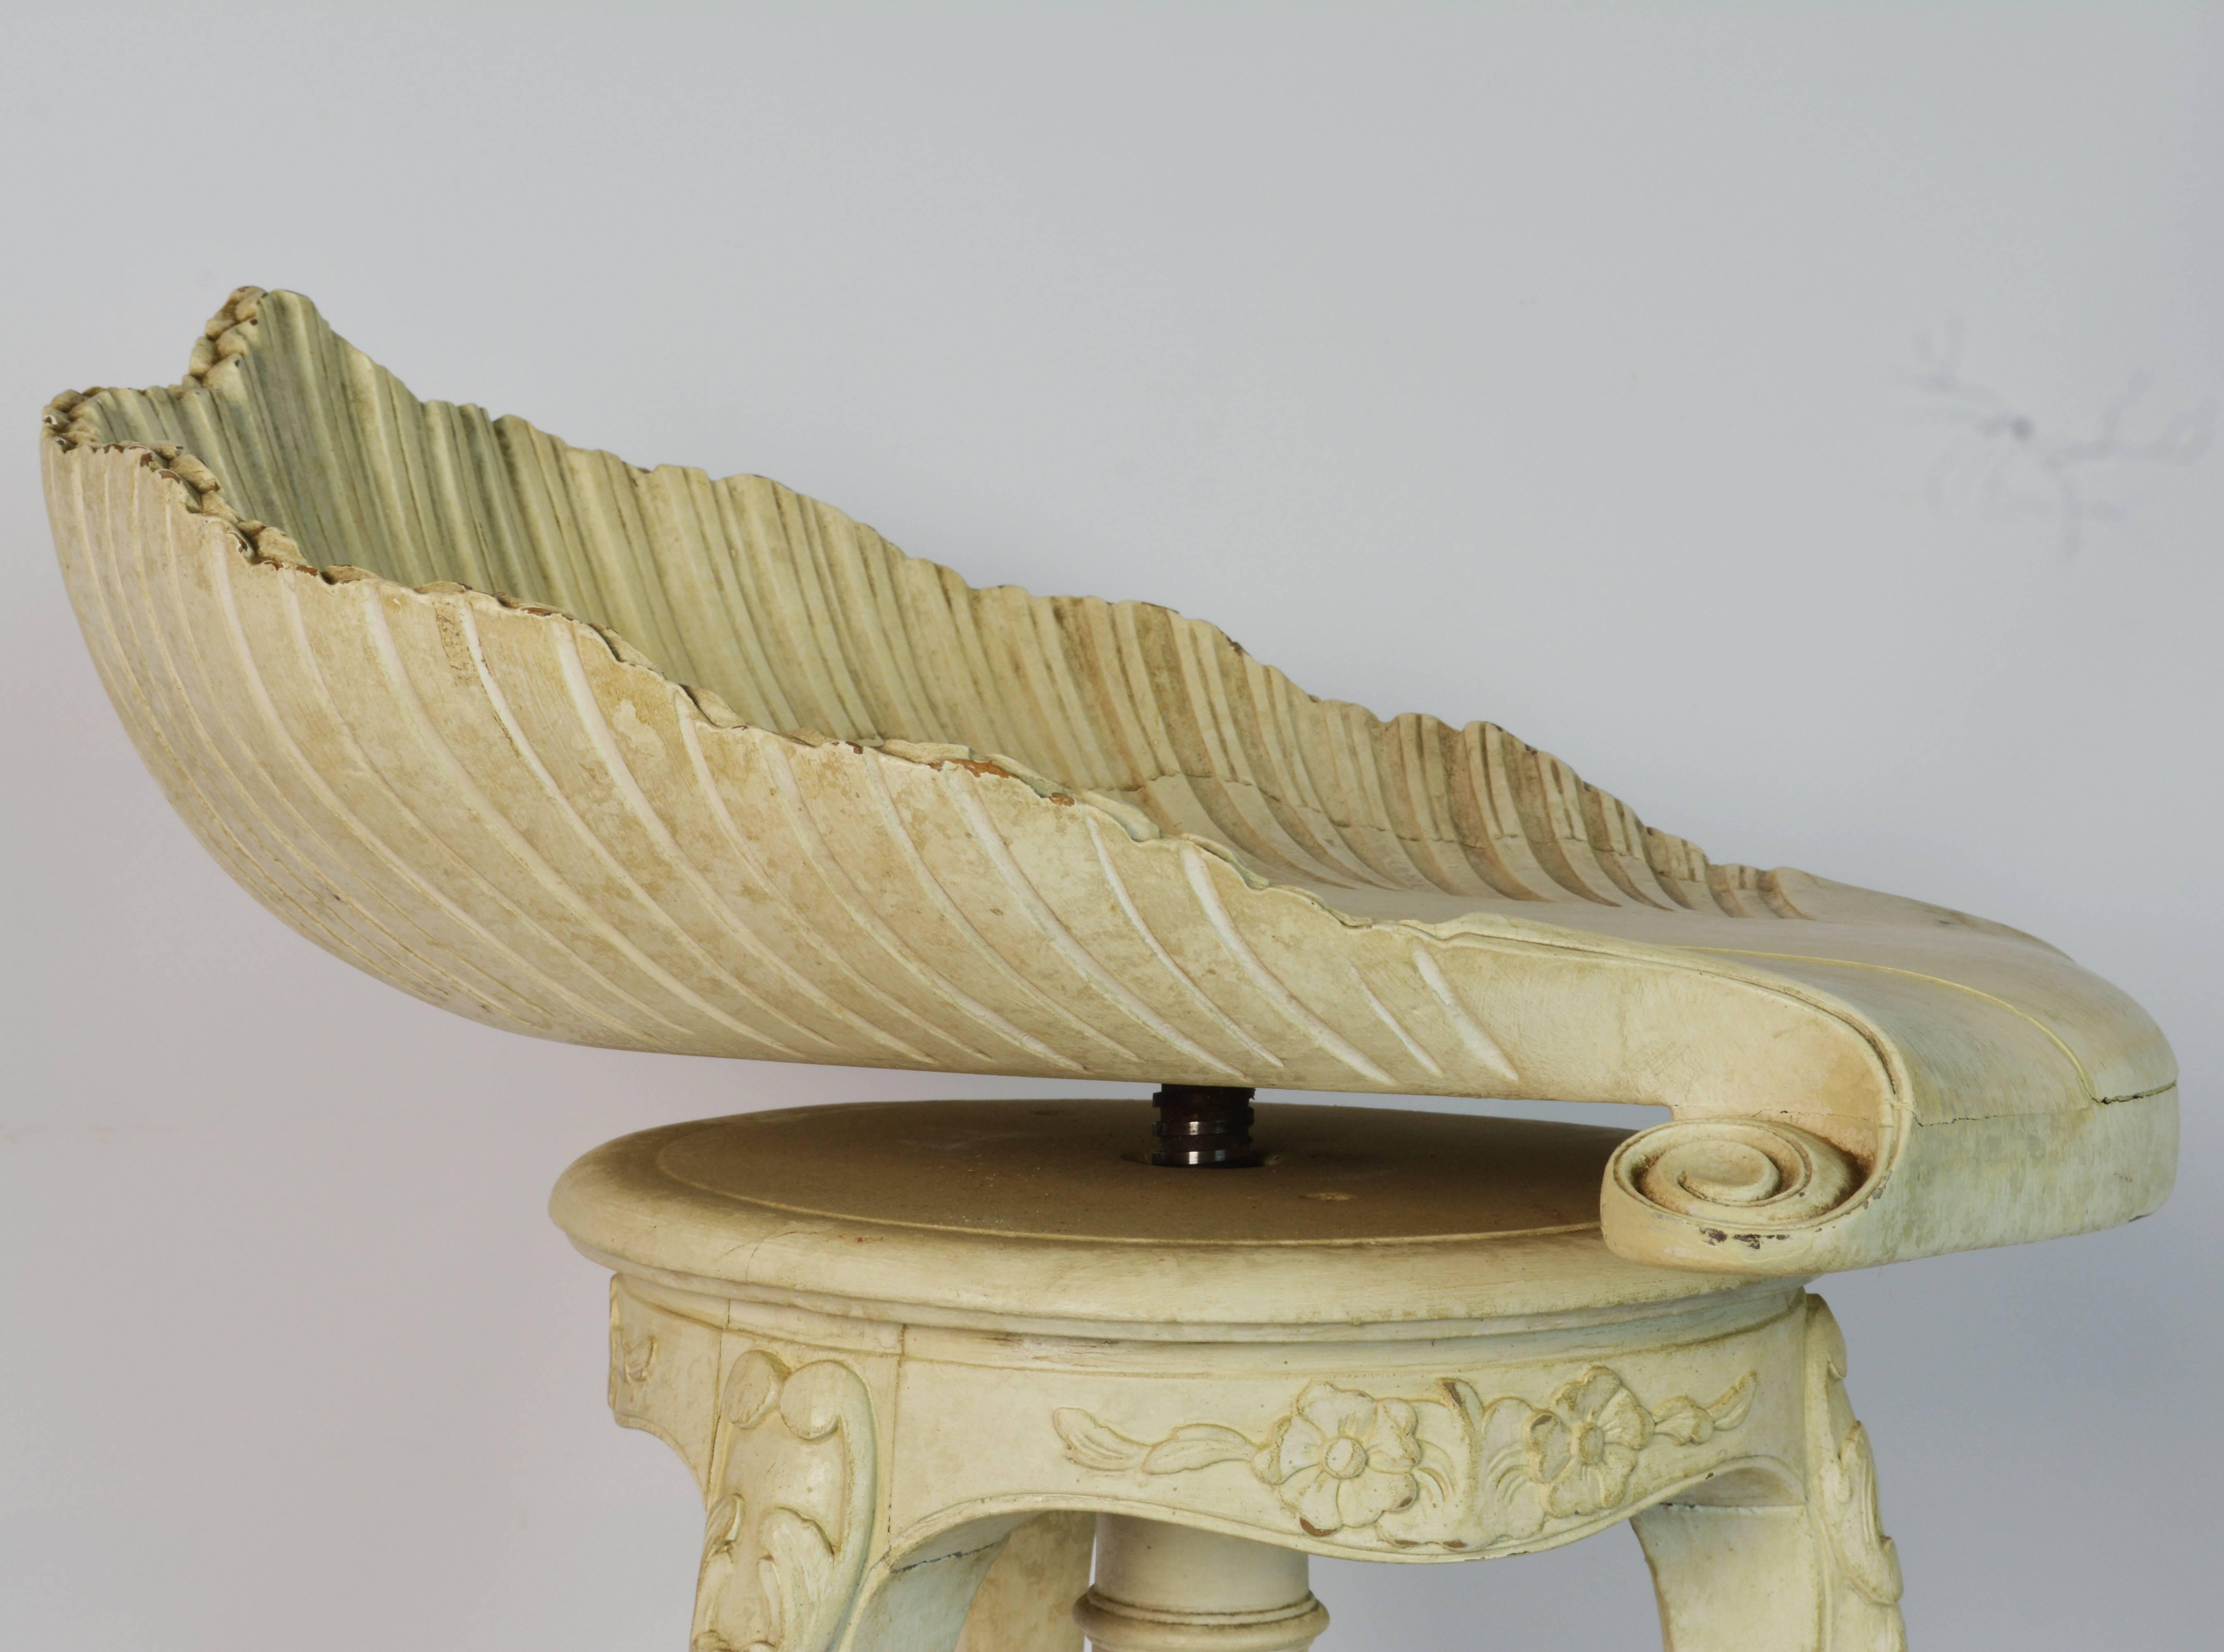 This carved and painted stool feature a sea shell shaped seat which by a swivel is adjustable in height appropriate for a piano stool. The seat is raised on a central support and three carved legs ending in paw feet and resting on a slightly